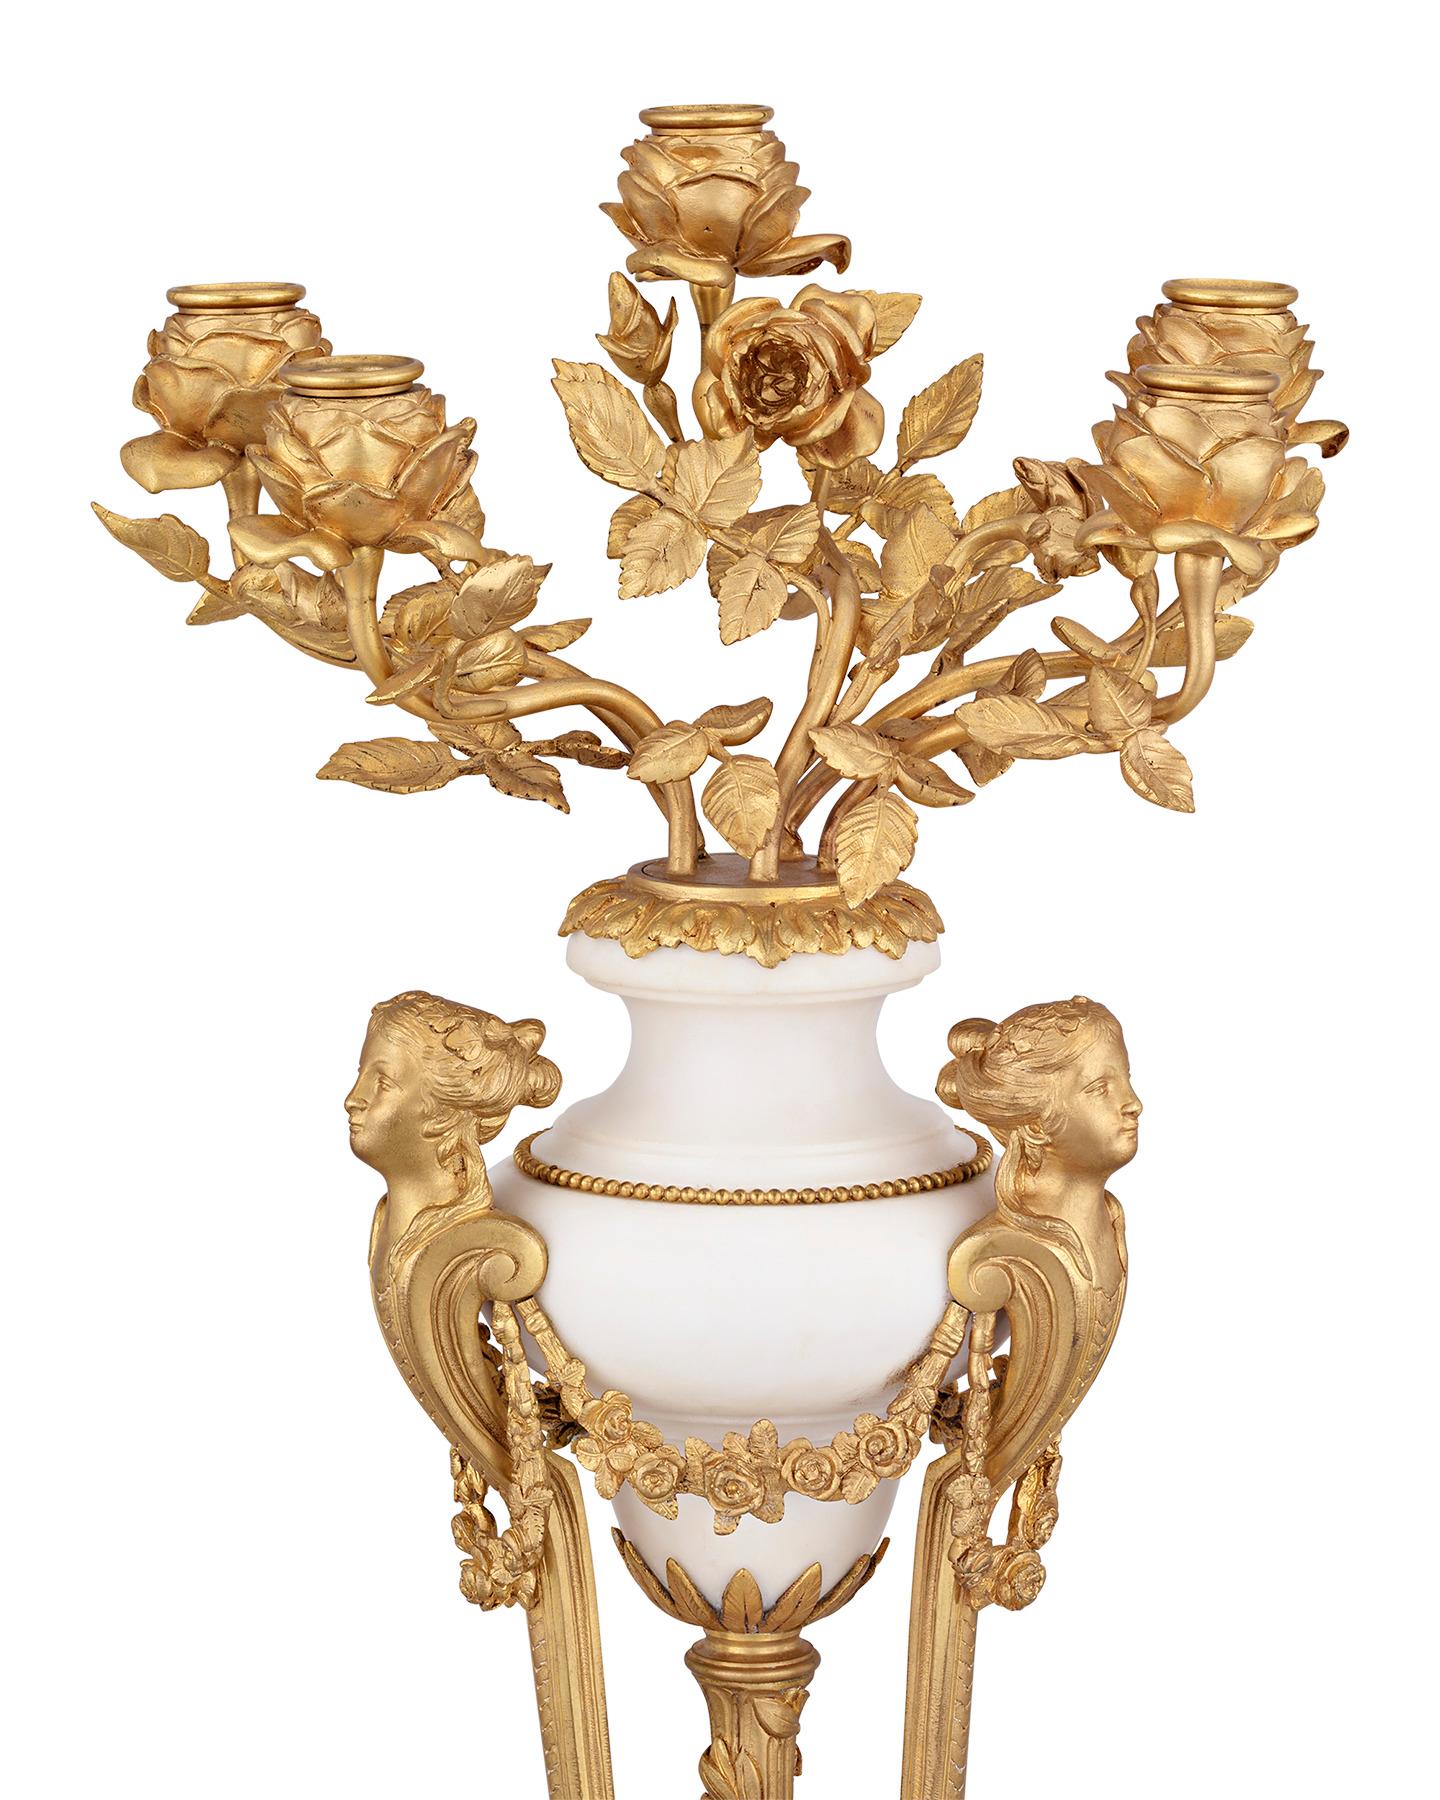 Doré Bronze French Neoclassical Candelabra In Excellent Condition For Sale In New Orleans, LA